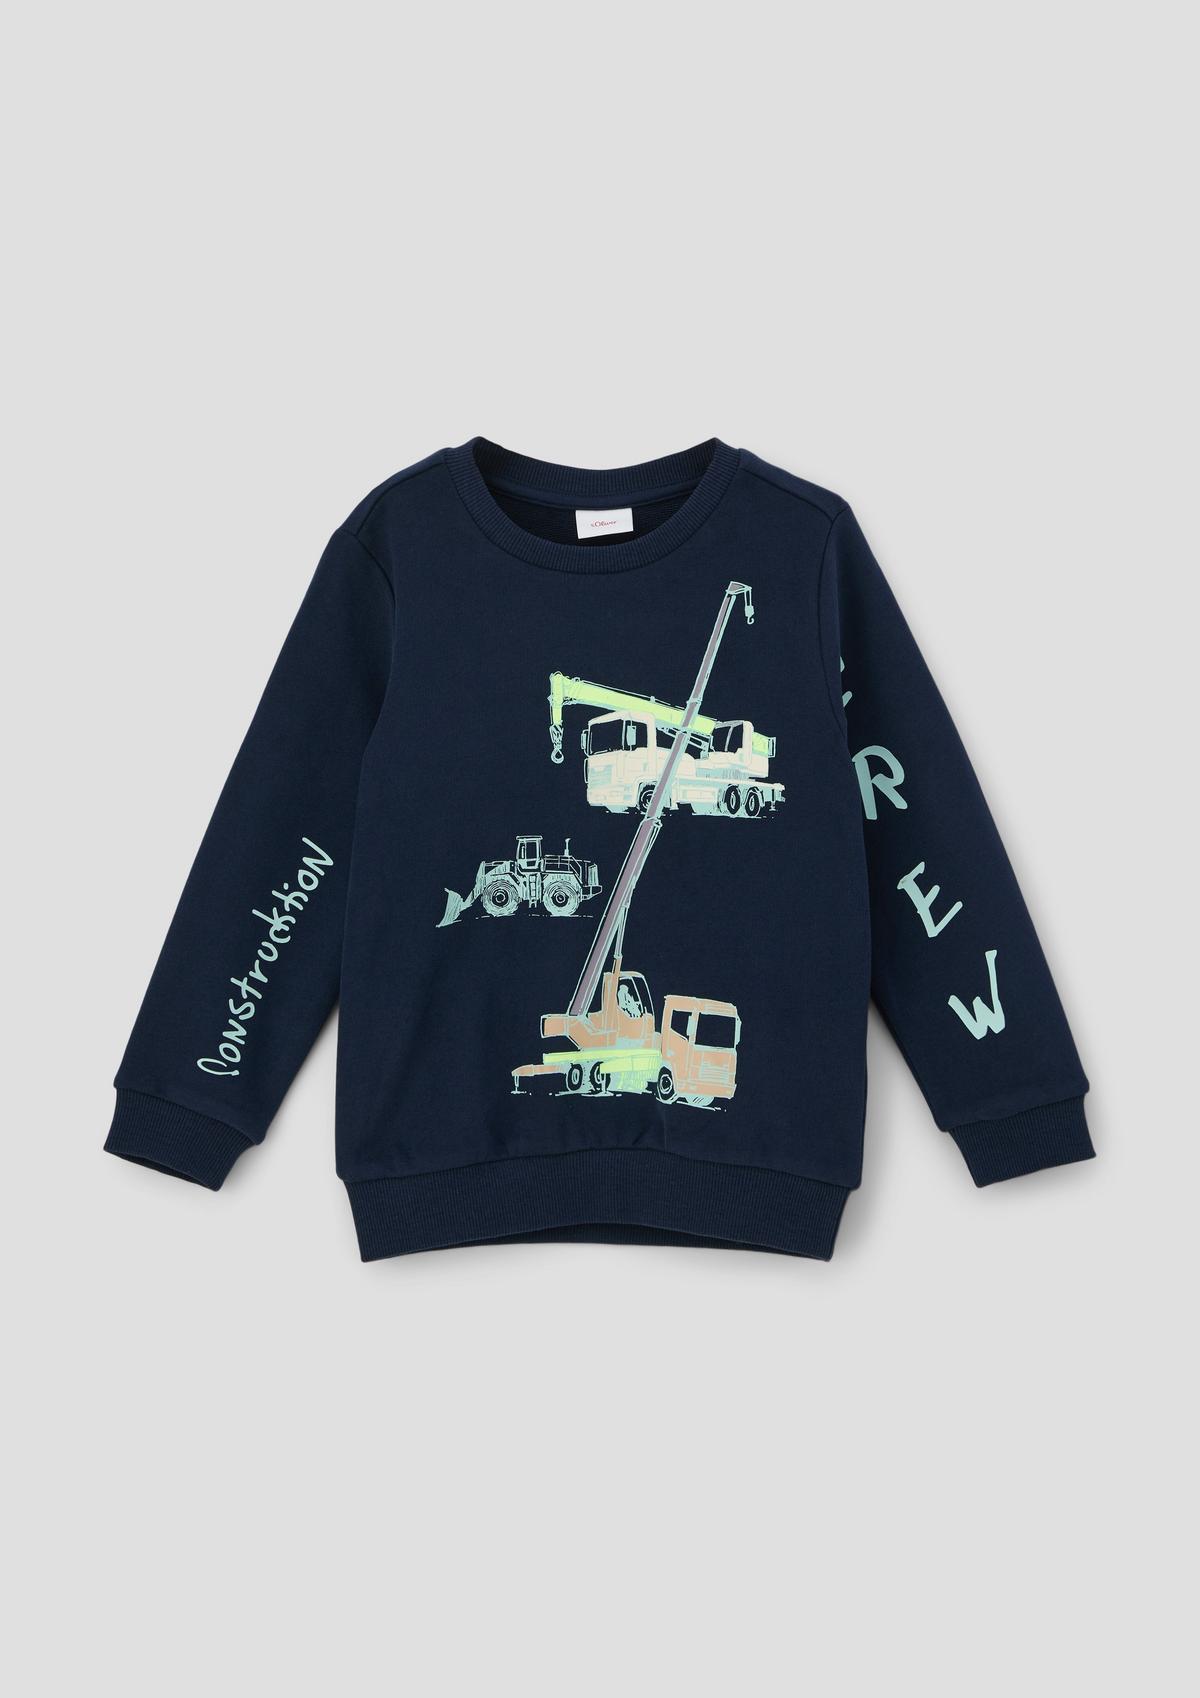 online Sweatshirts boys knitwear and for